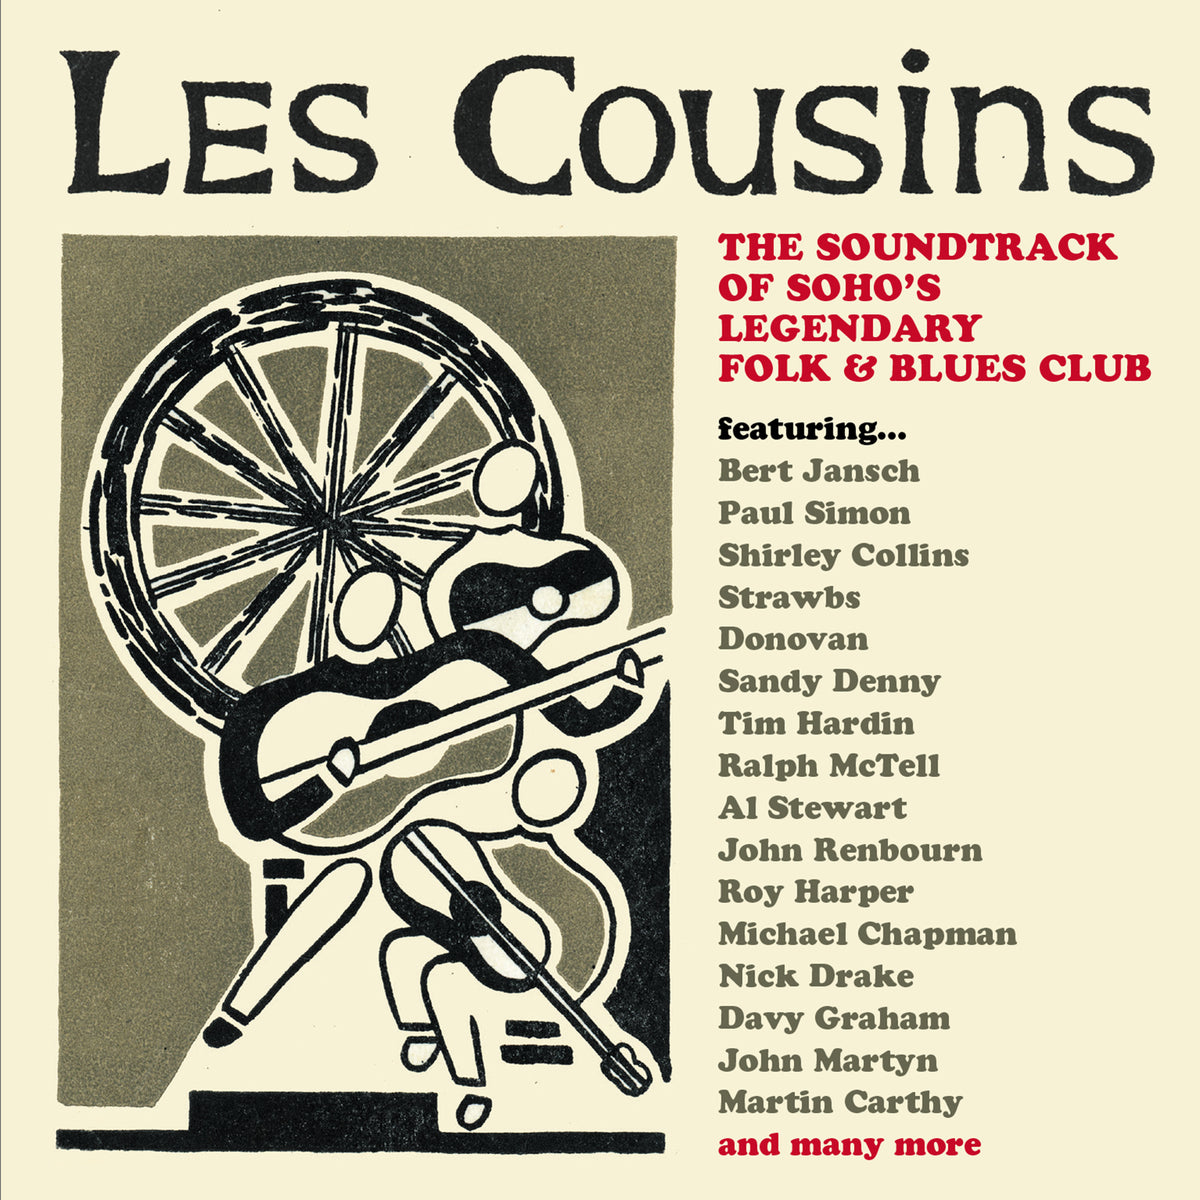 Les Cousins - The Soundtrack Of Soho's Legendary Folk & Blues Club 3cd Clamshell Box by VARIOUS ARTISTS on Cherry Re